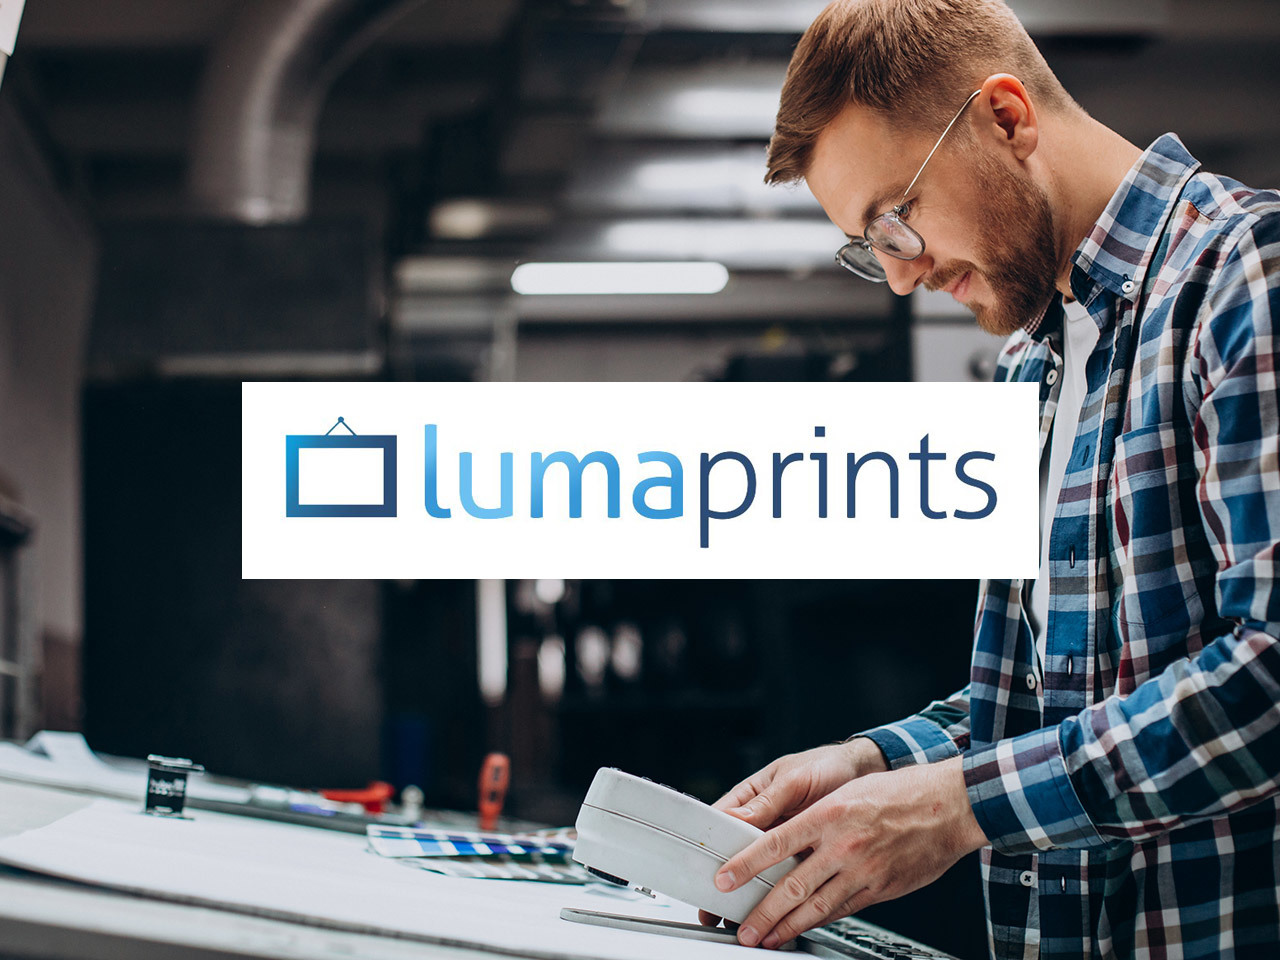 GEEK Up x Lumaprints: The collaboration created the world's top 10 canvas and digital print E-commerce platform